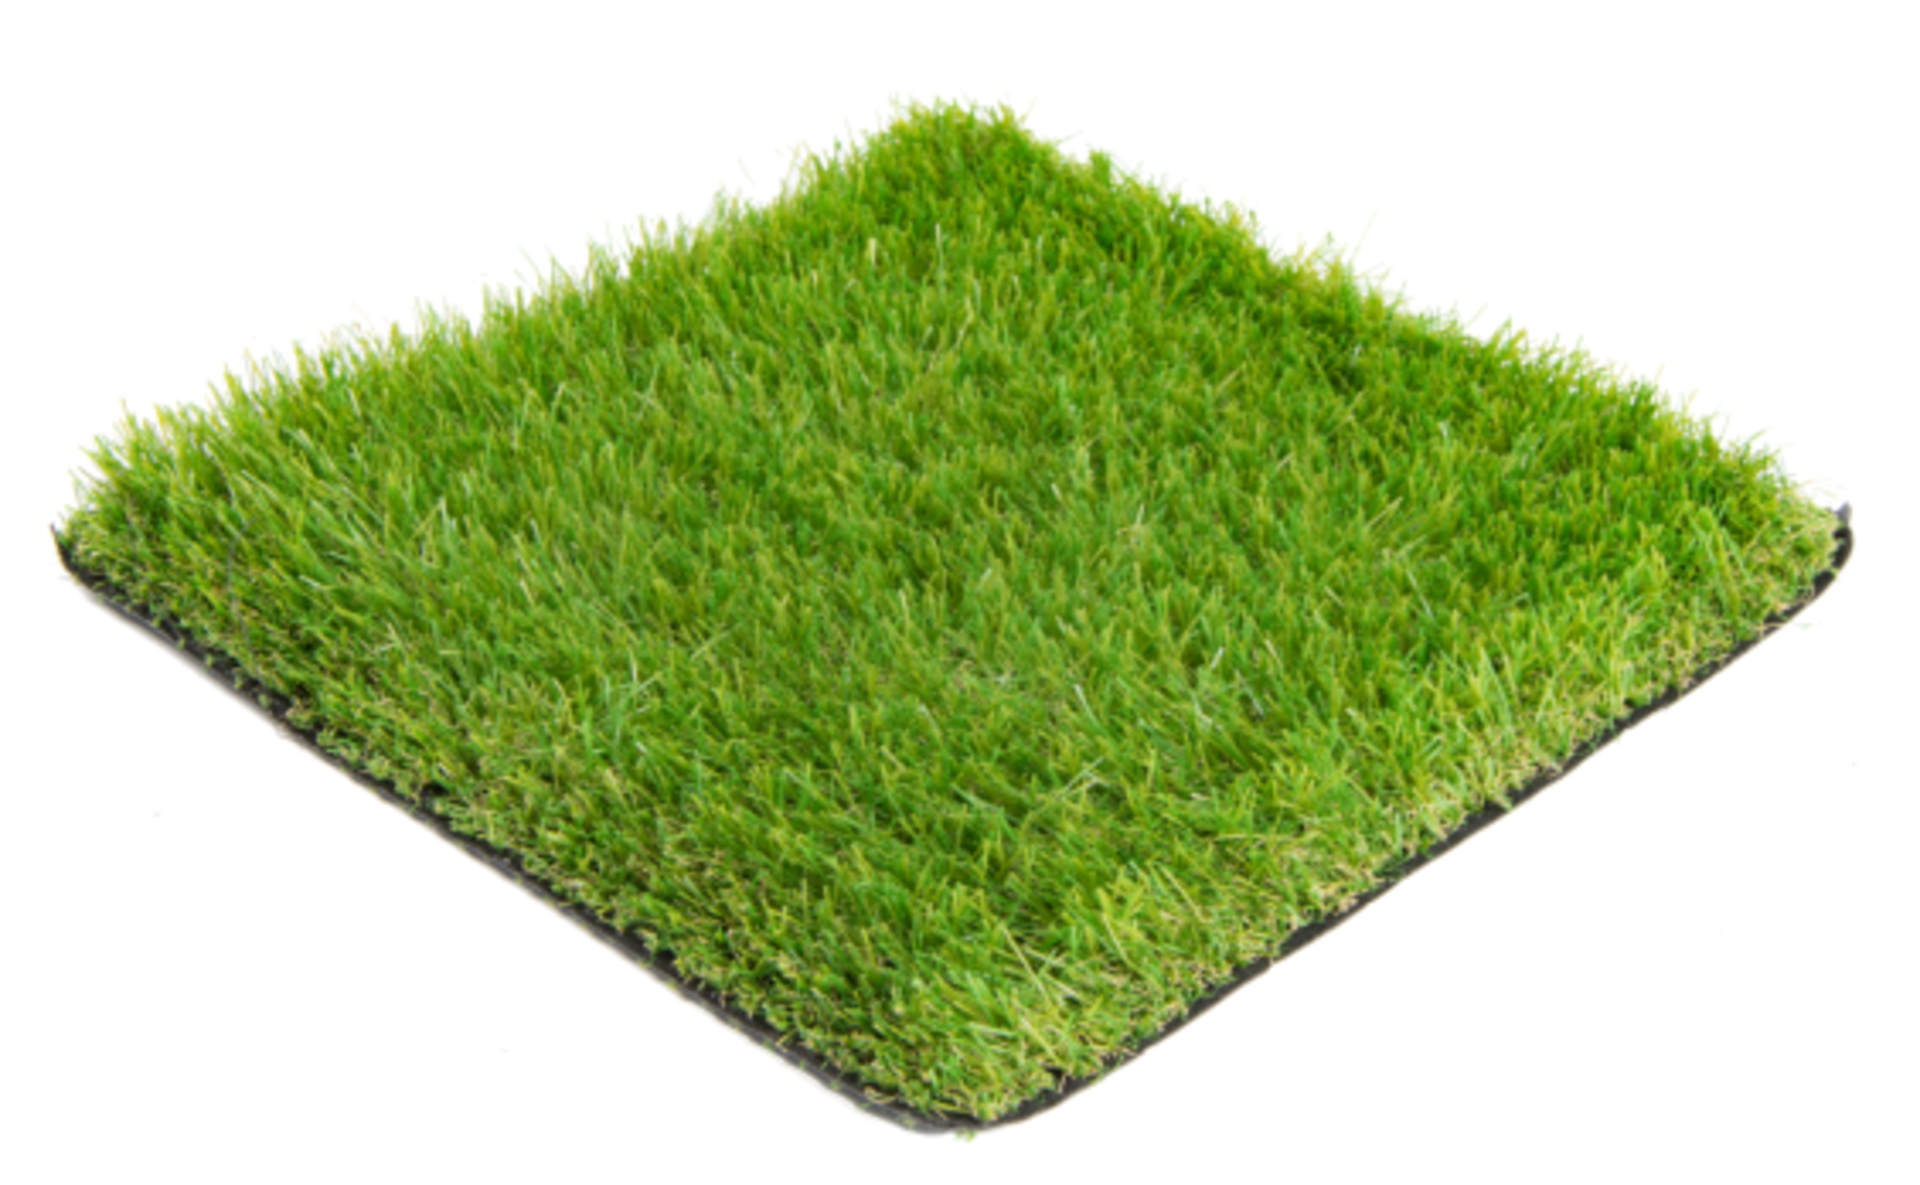 A Full Roll of Natural 35 Artificial Grass, 25 meters x 4 meters